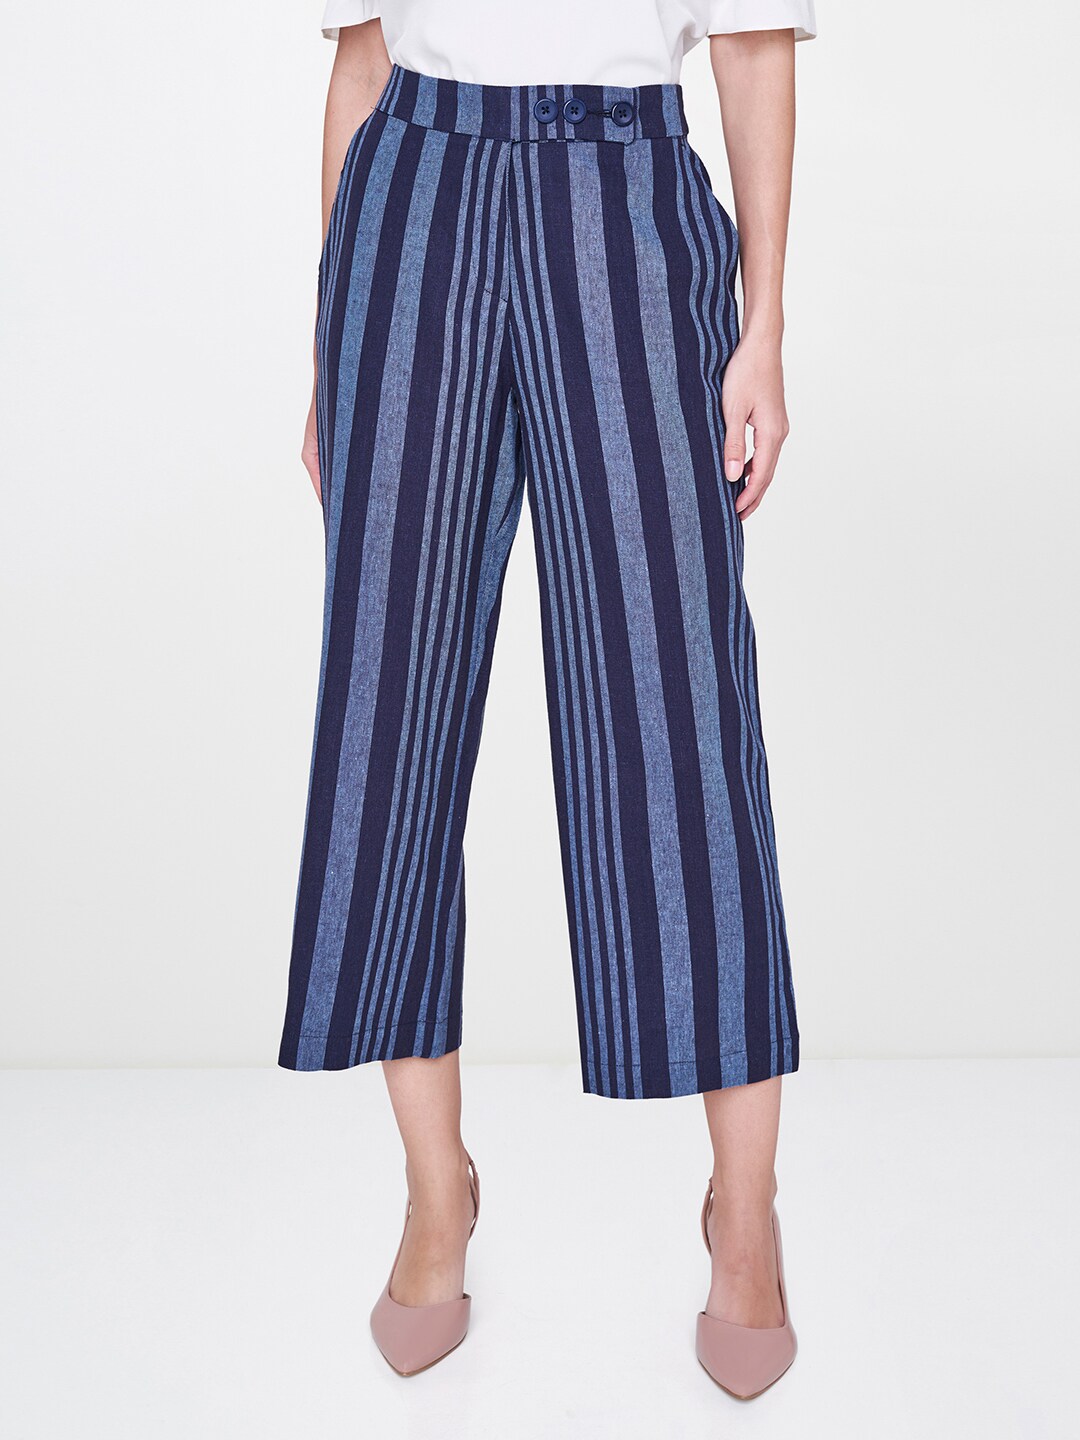 AND Women Navy Blue Striped Slim Fit Easy Wash Linen Trousers Price in India